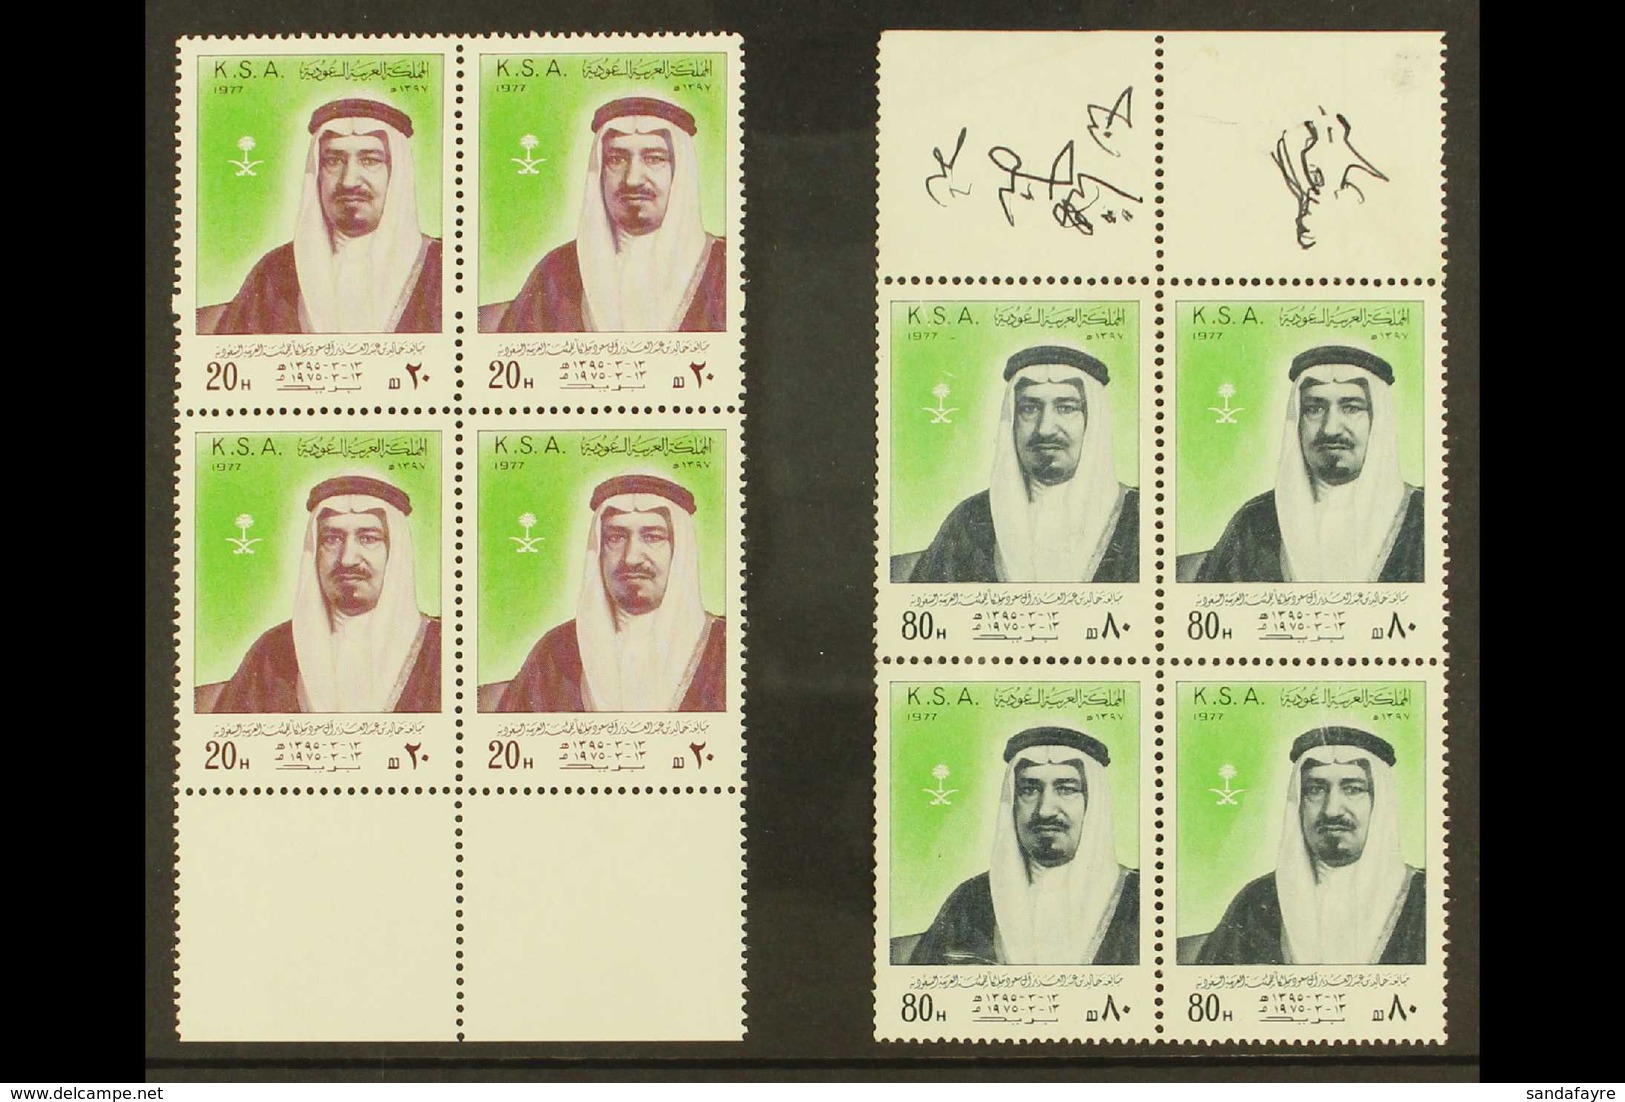 1977  20h And 80h 2nd Anniv With ERROR OF DATES, SG 1197/1198, With Each As Never Hinged Mint Marginal Blocks Of Four, T - Saoedi-Arabië